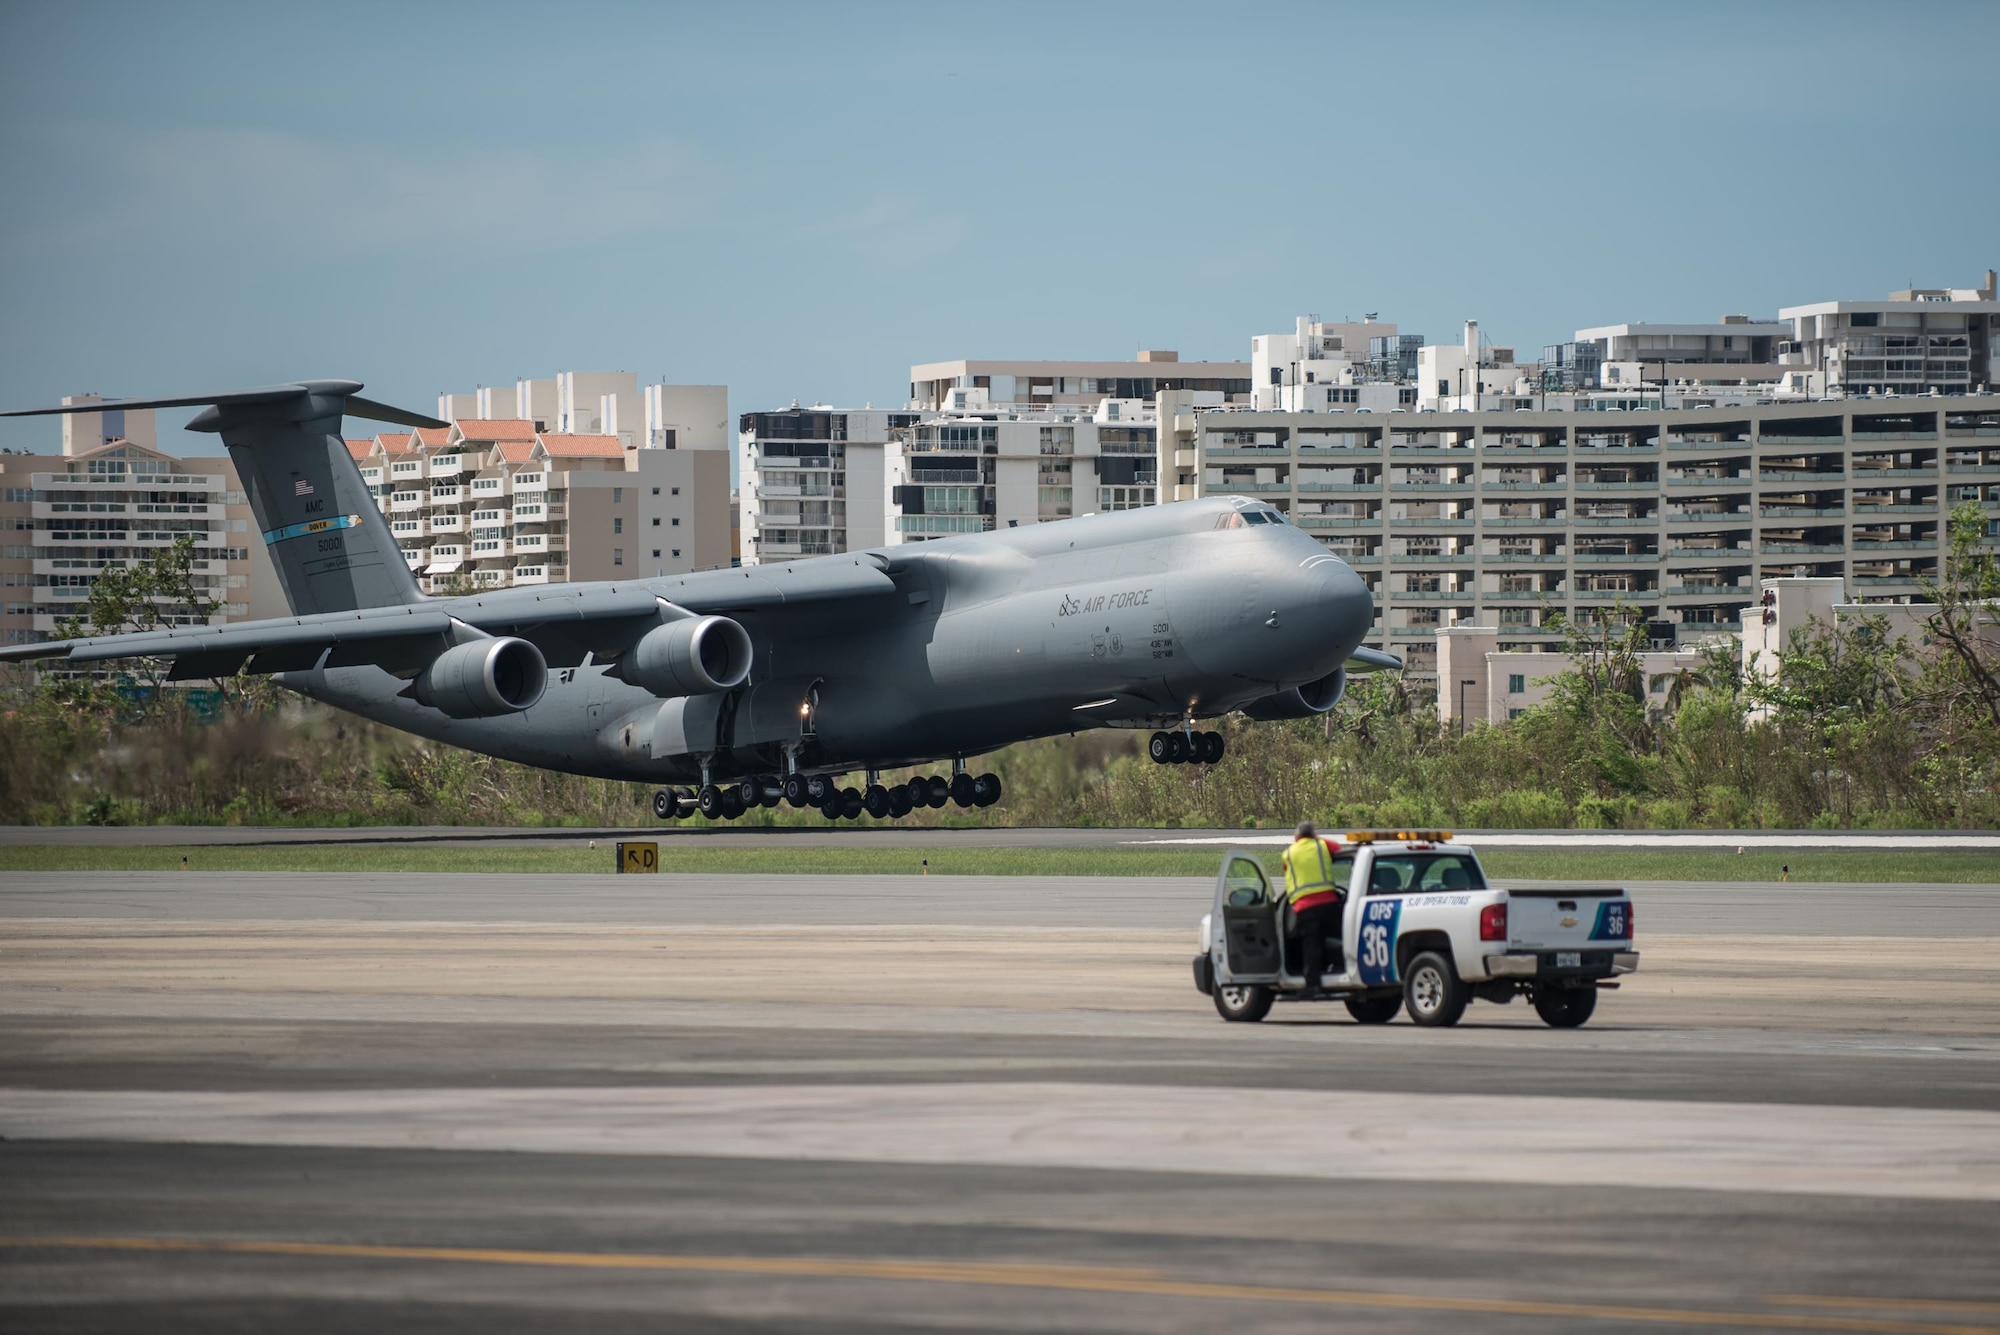 A U.S. Air Force C-5 Galaxy loaded with humanitarian aid lands at Luis Muñoz Marín International Airport in San Juan on Oct. 5, 2017. The cargo will be downloaded and staged for distribution by Airmen from the Kentucky Air Guard’s 123rd Contingency Response Group as part of Hurricane Maria recovery efforts. (U.S. Air National Guard photo by Lt. Col. Dale Greer)